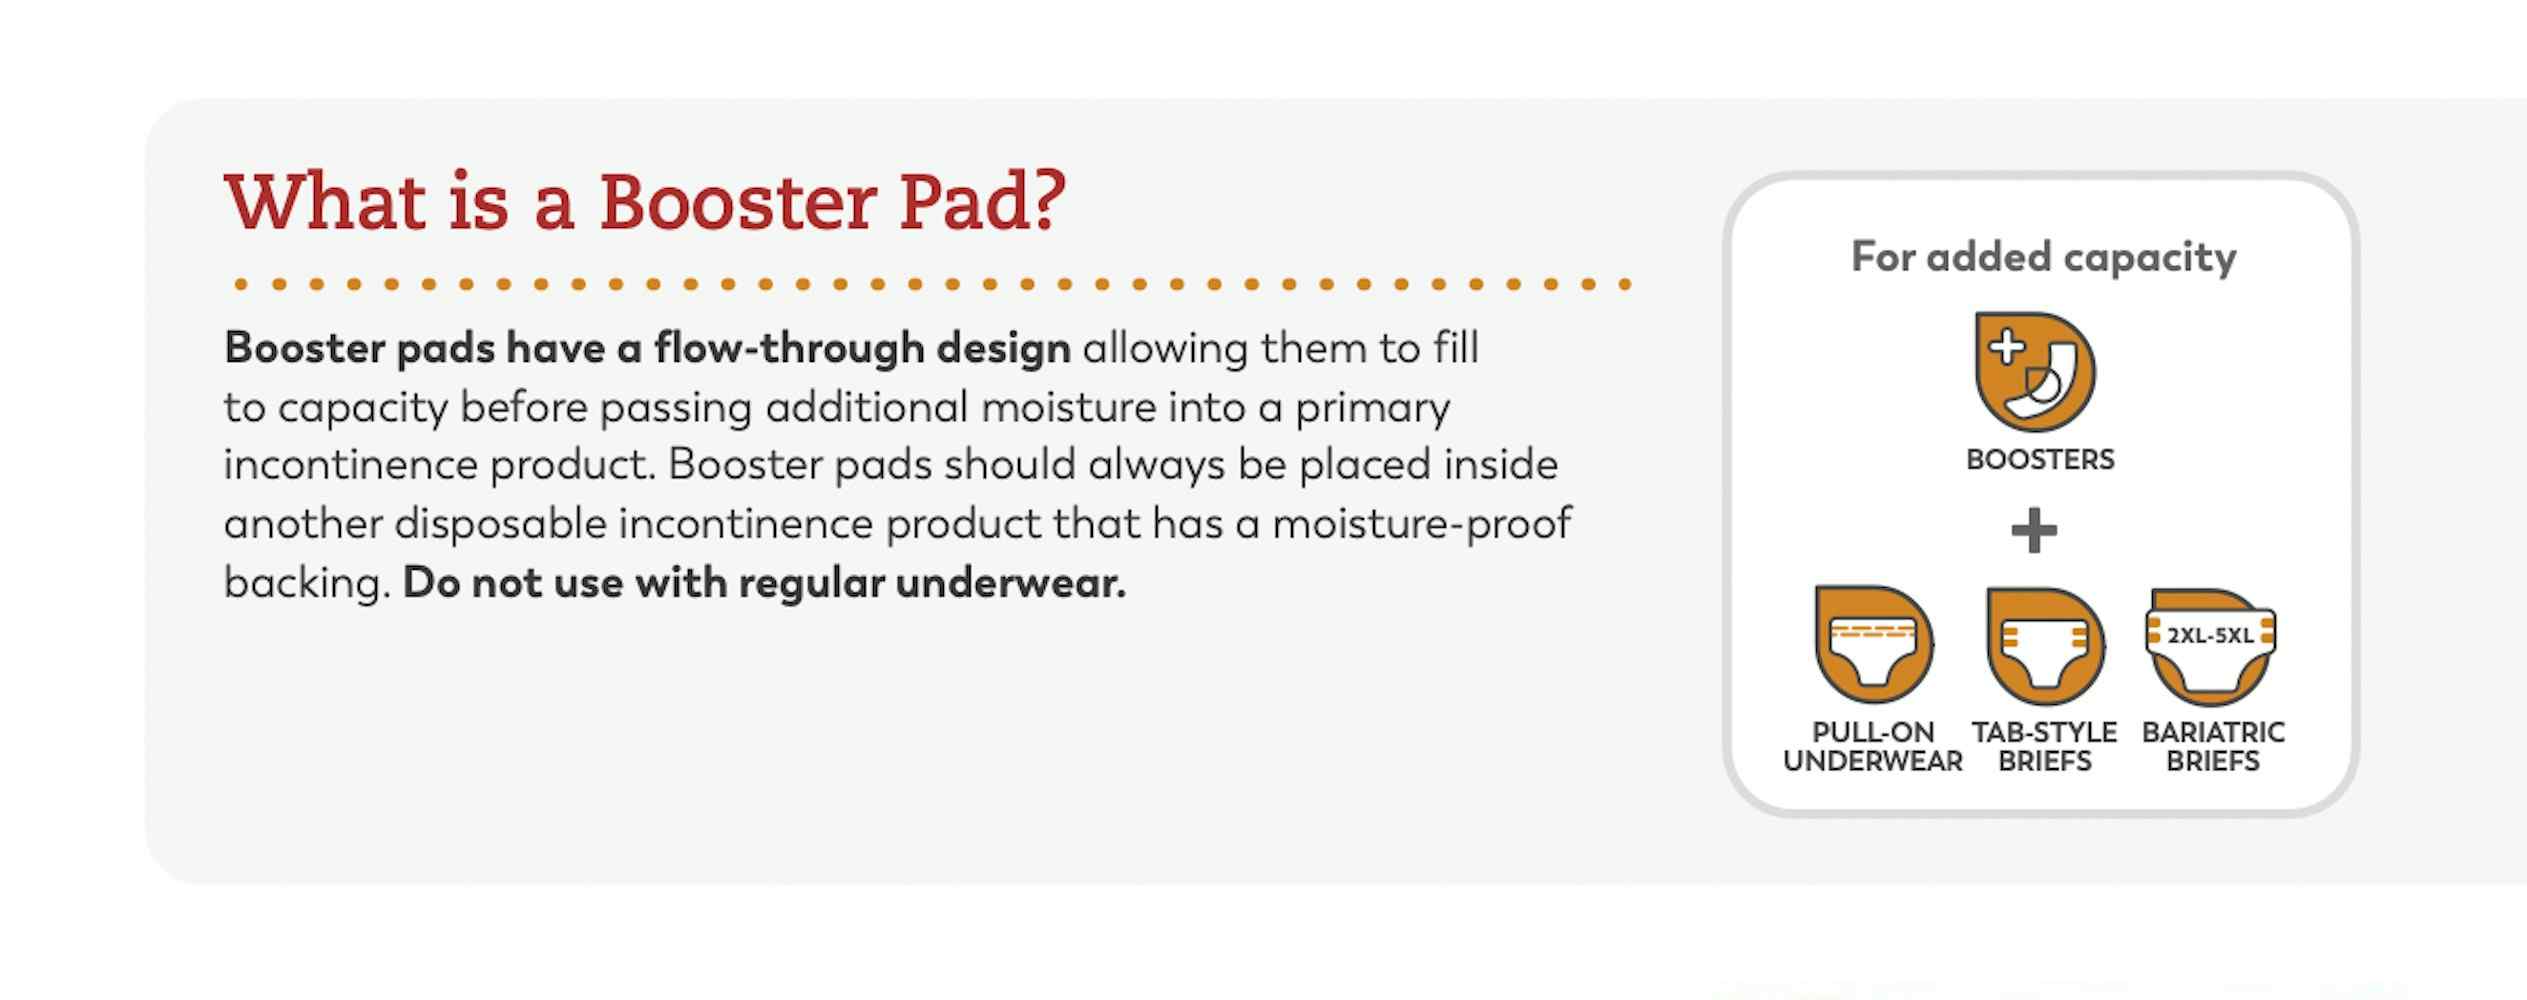 Tranquility TopLiner Booster Pads, What is a Booster Pad?